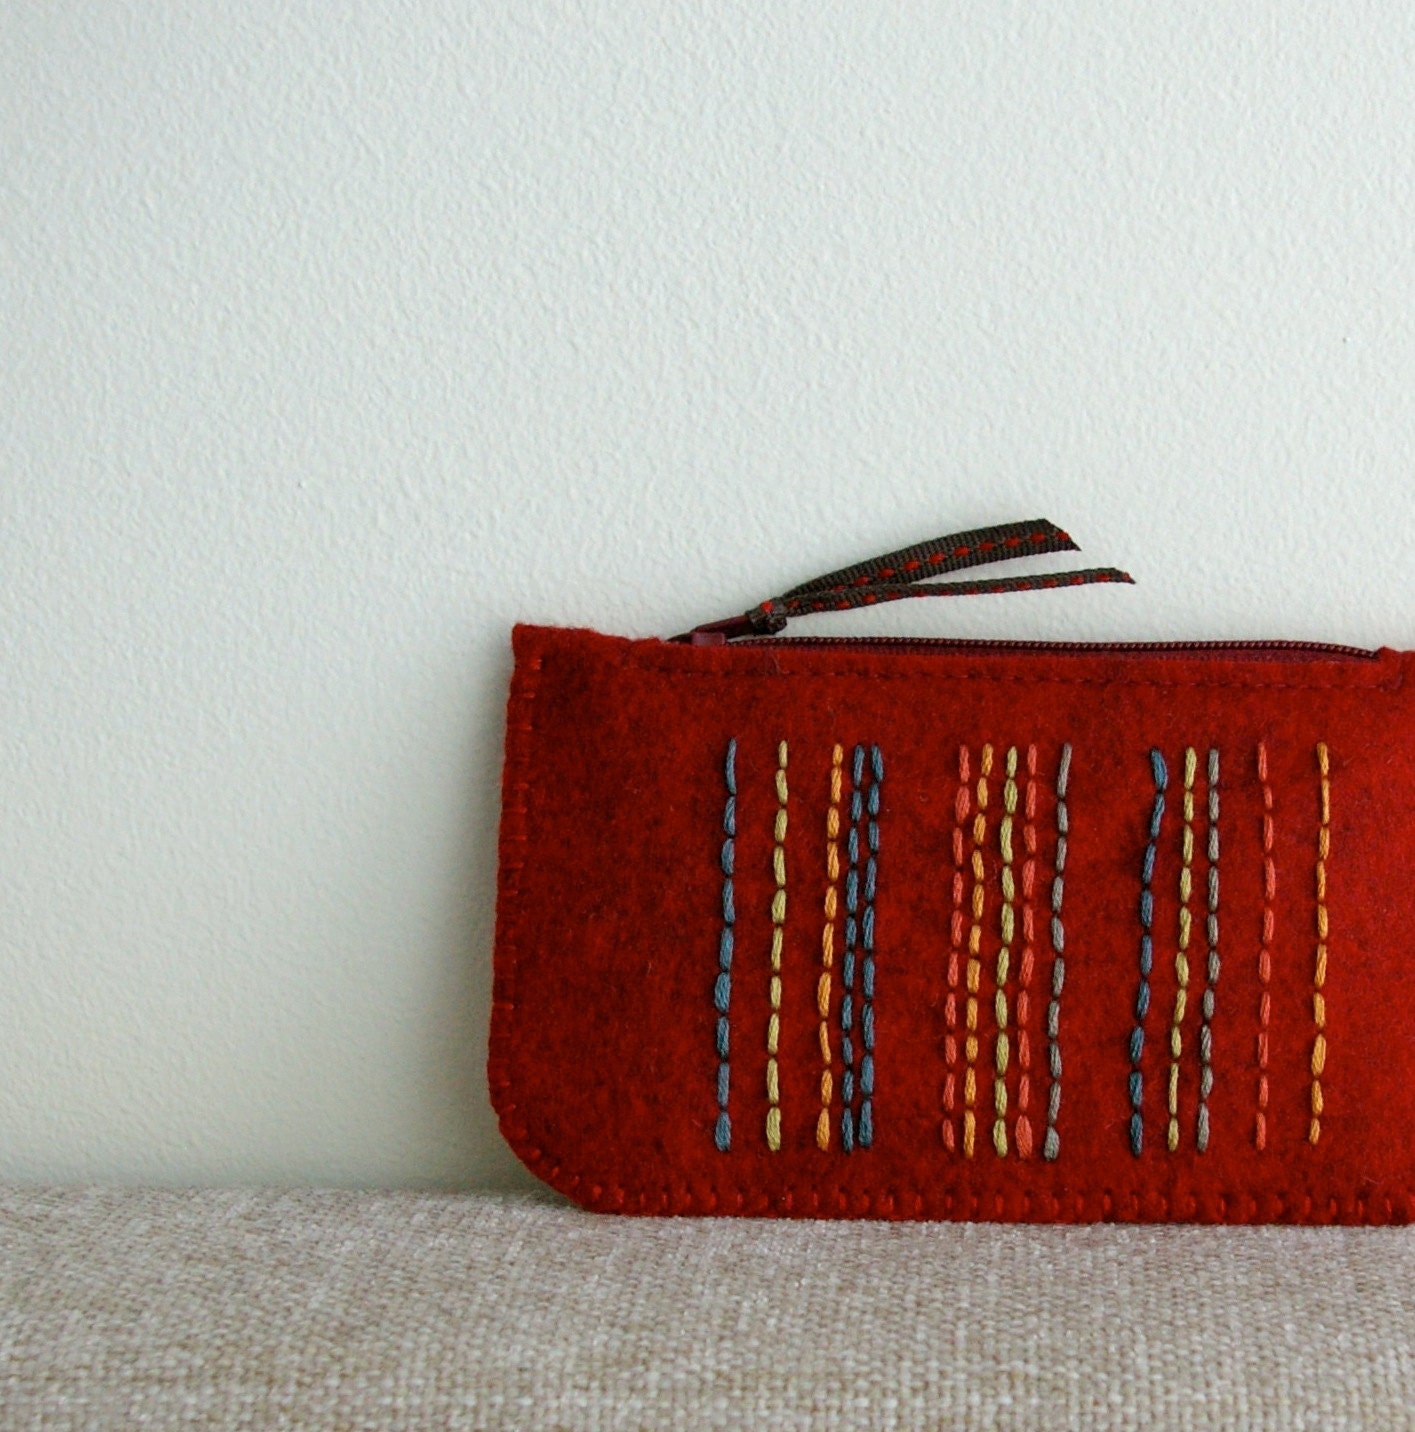 Cajun in Spice Market: Made To Order Hand Embroidered Wool Felt Coin Purse or iPhone Cozy by LoftFullOfGoodies